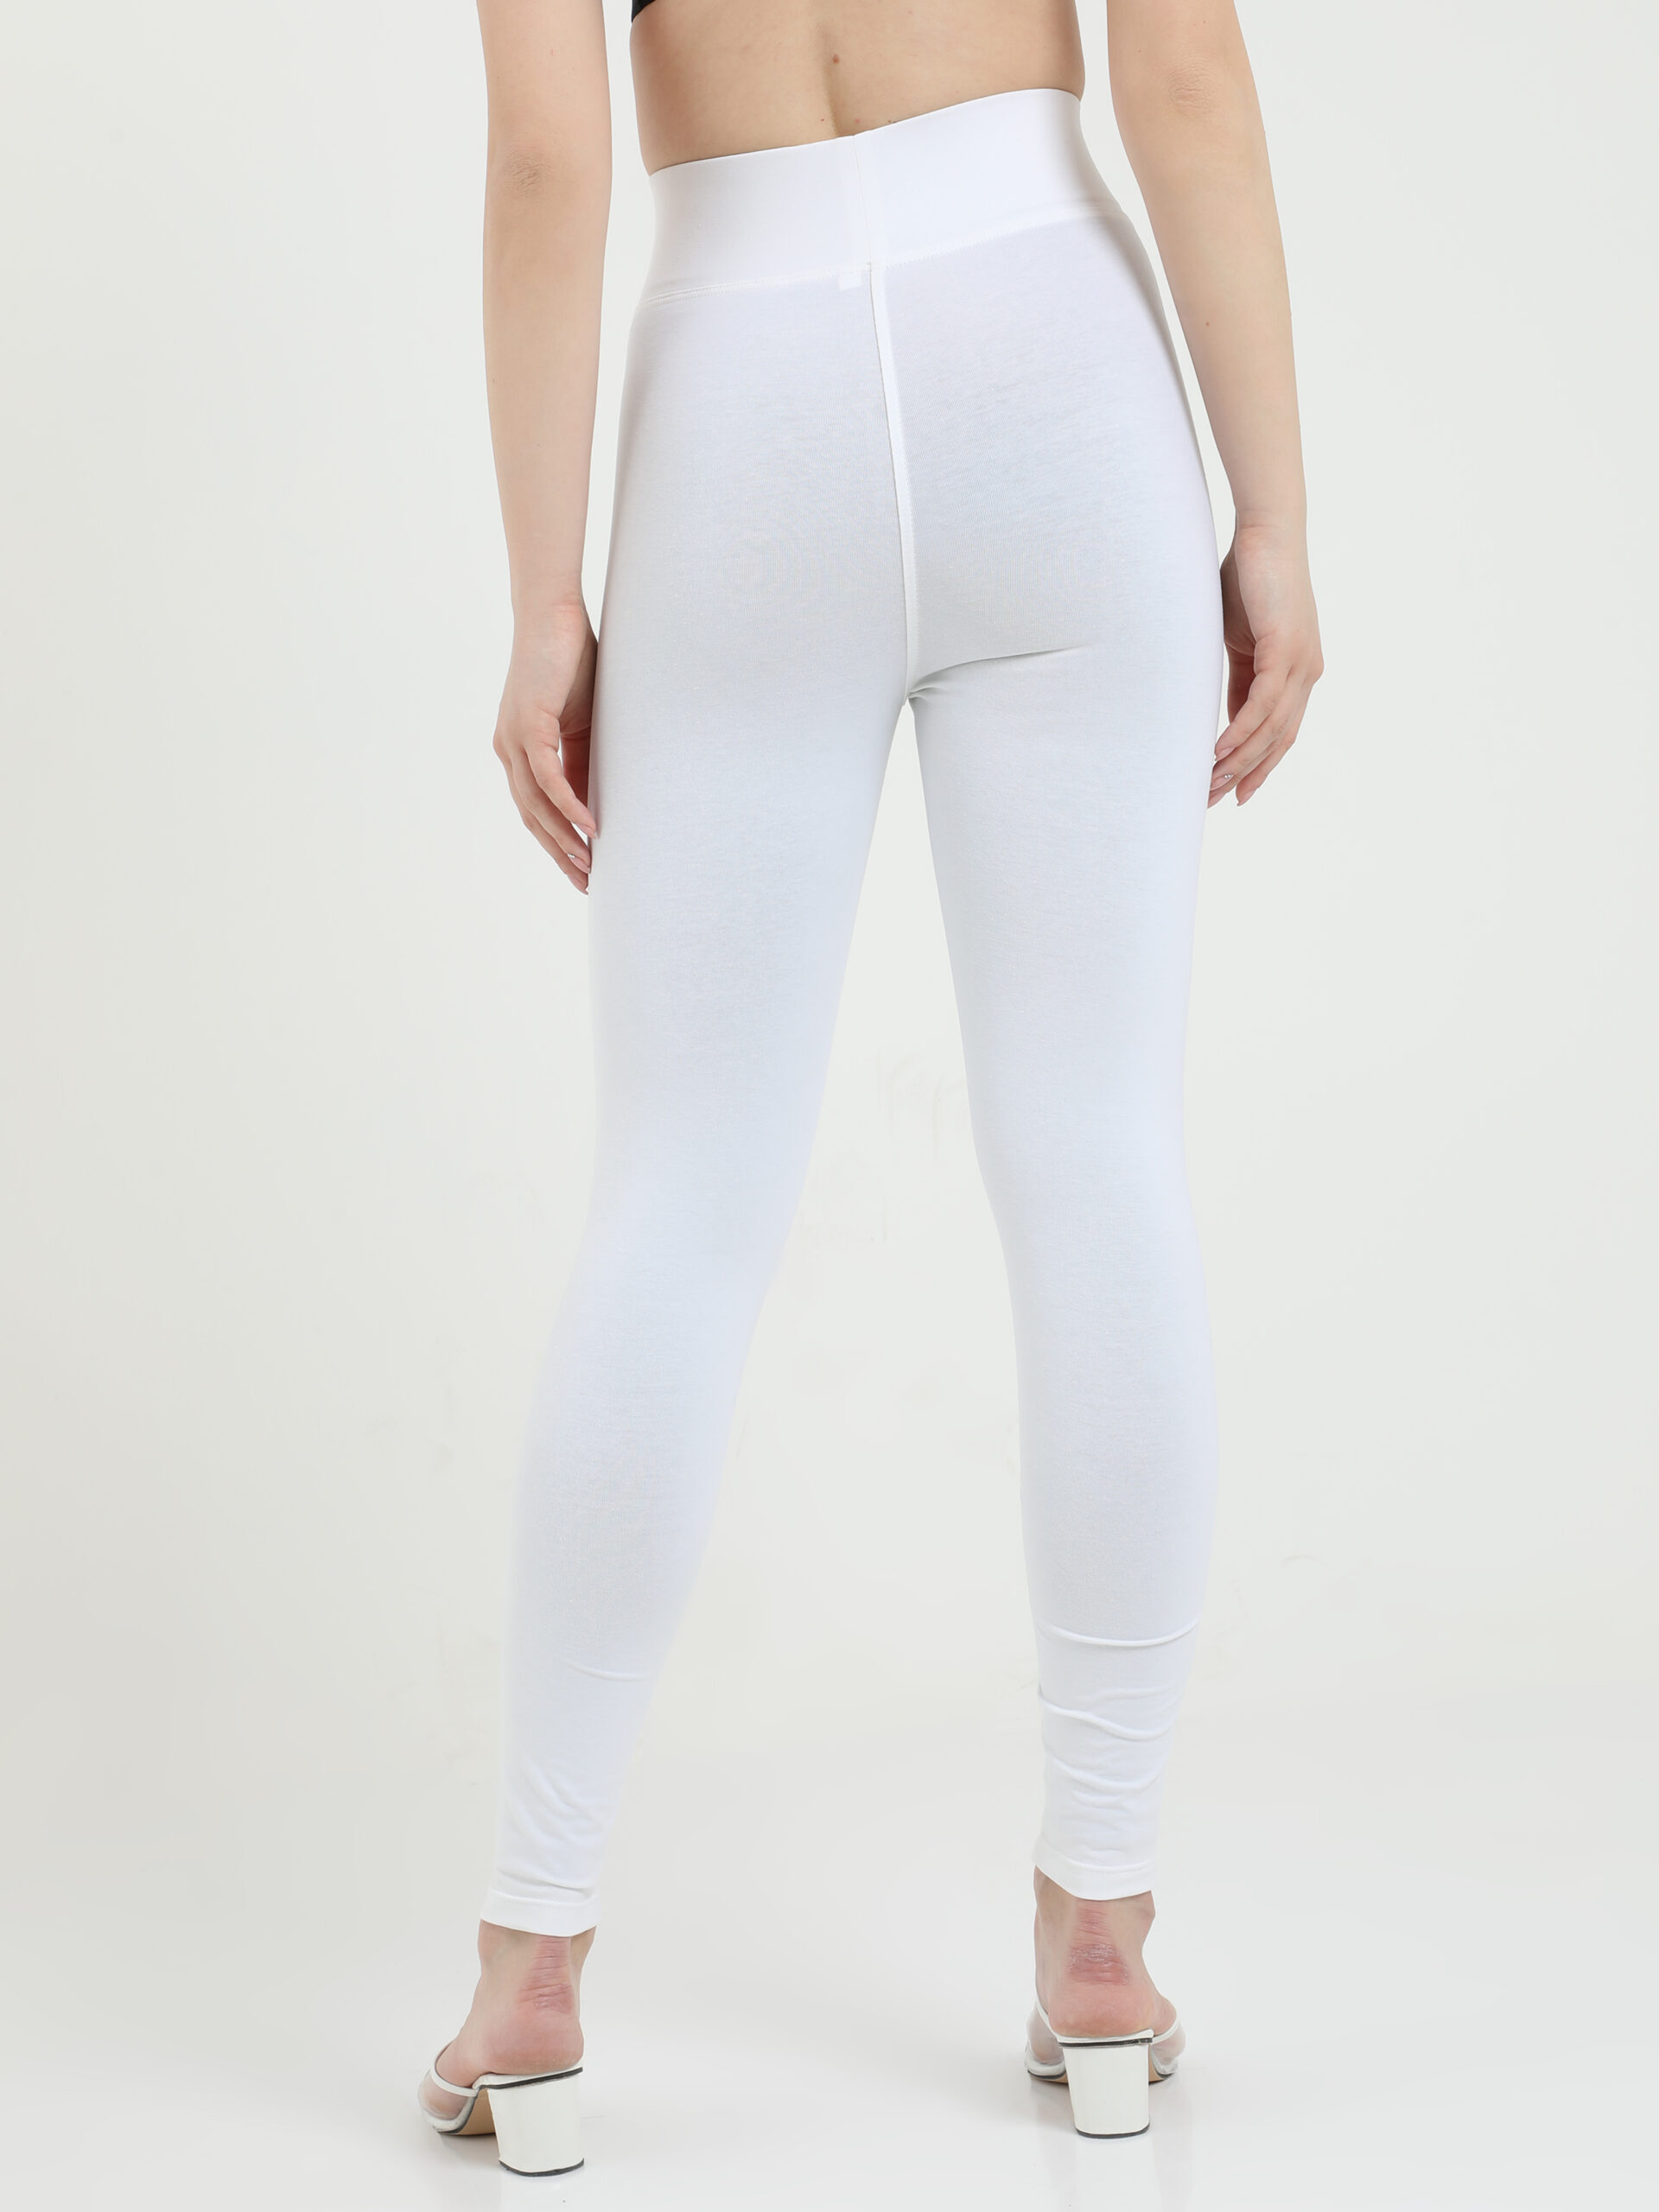 White leggings for women Compression pant high waist - Belore Slims